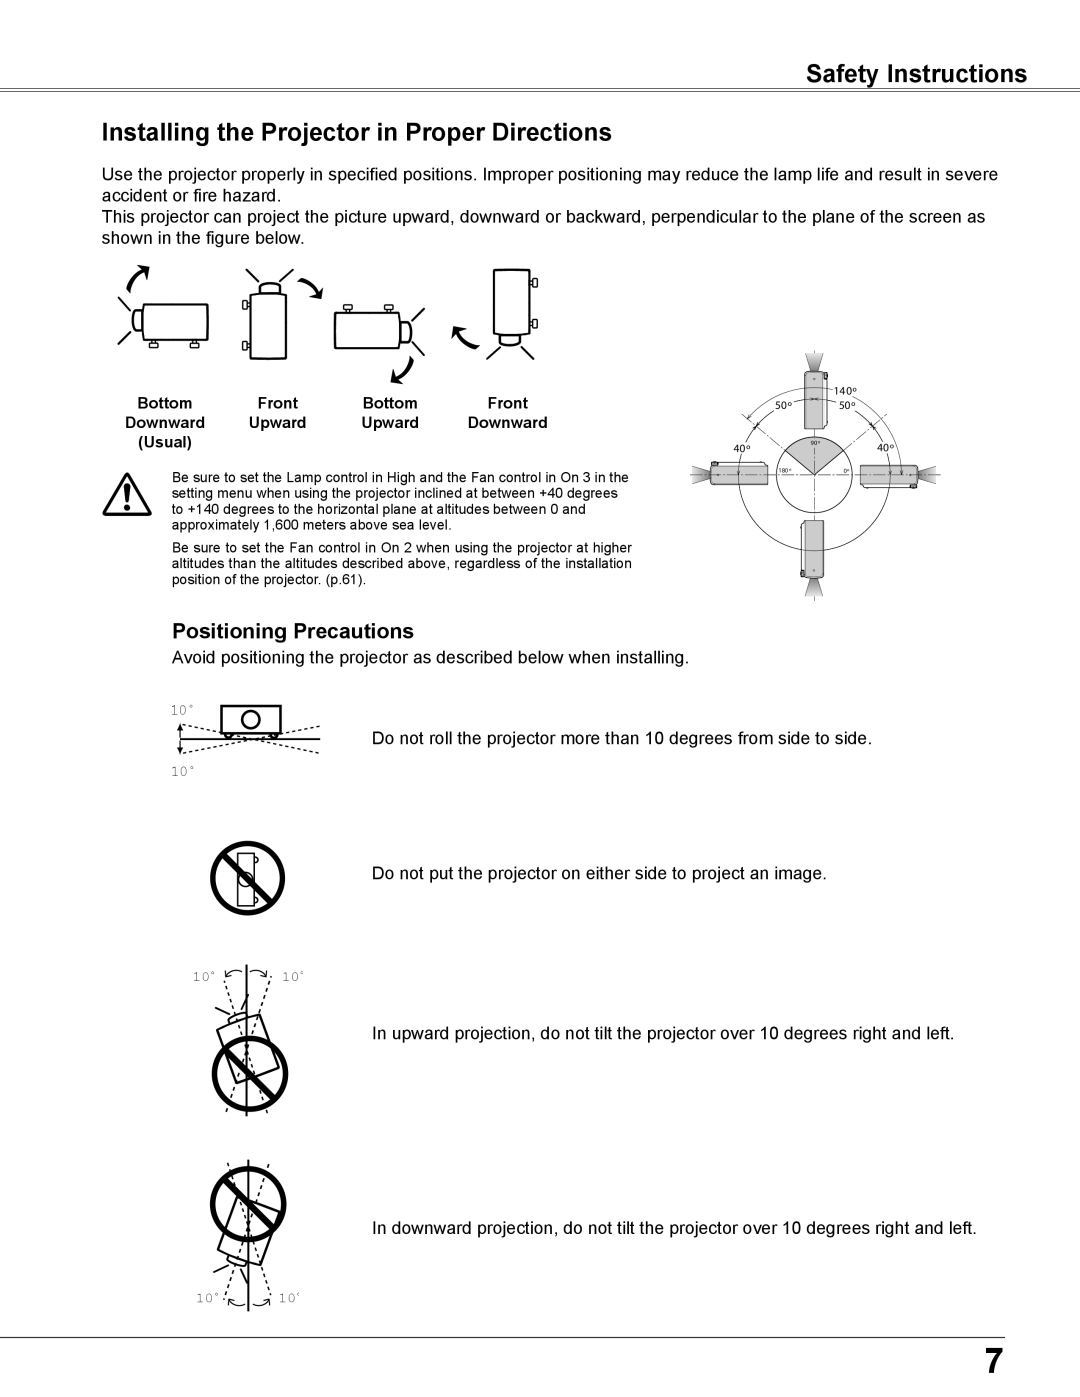 Sanyo WXU700A owner manual Safety Instructions, Installing the Projector in Proper Directions, Positioning Precautions 